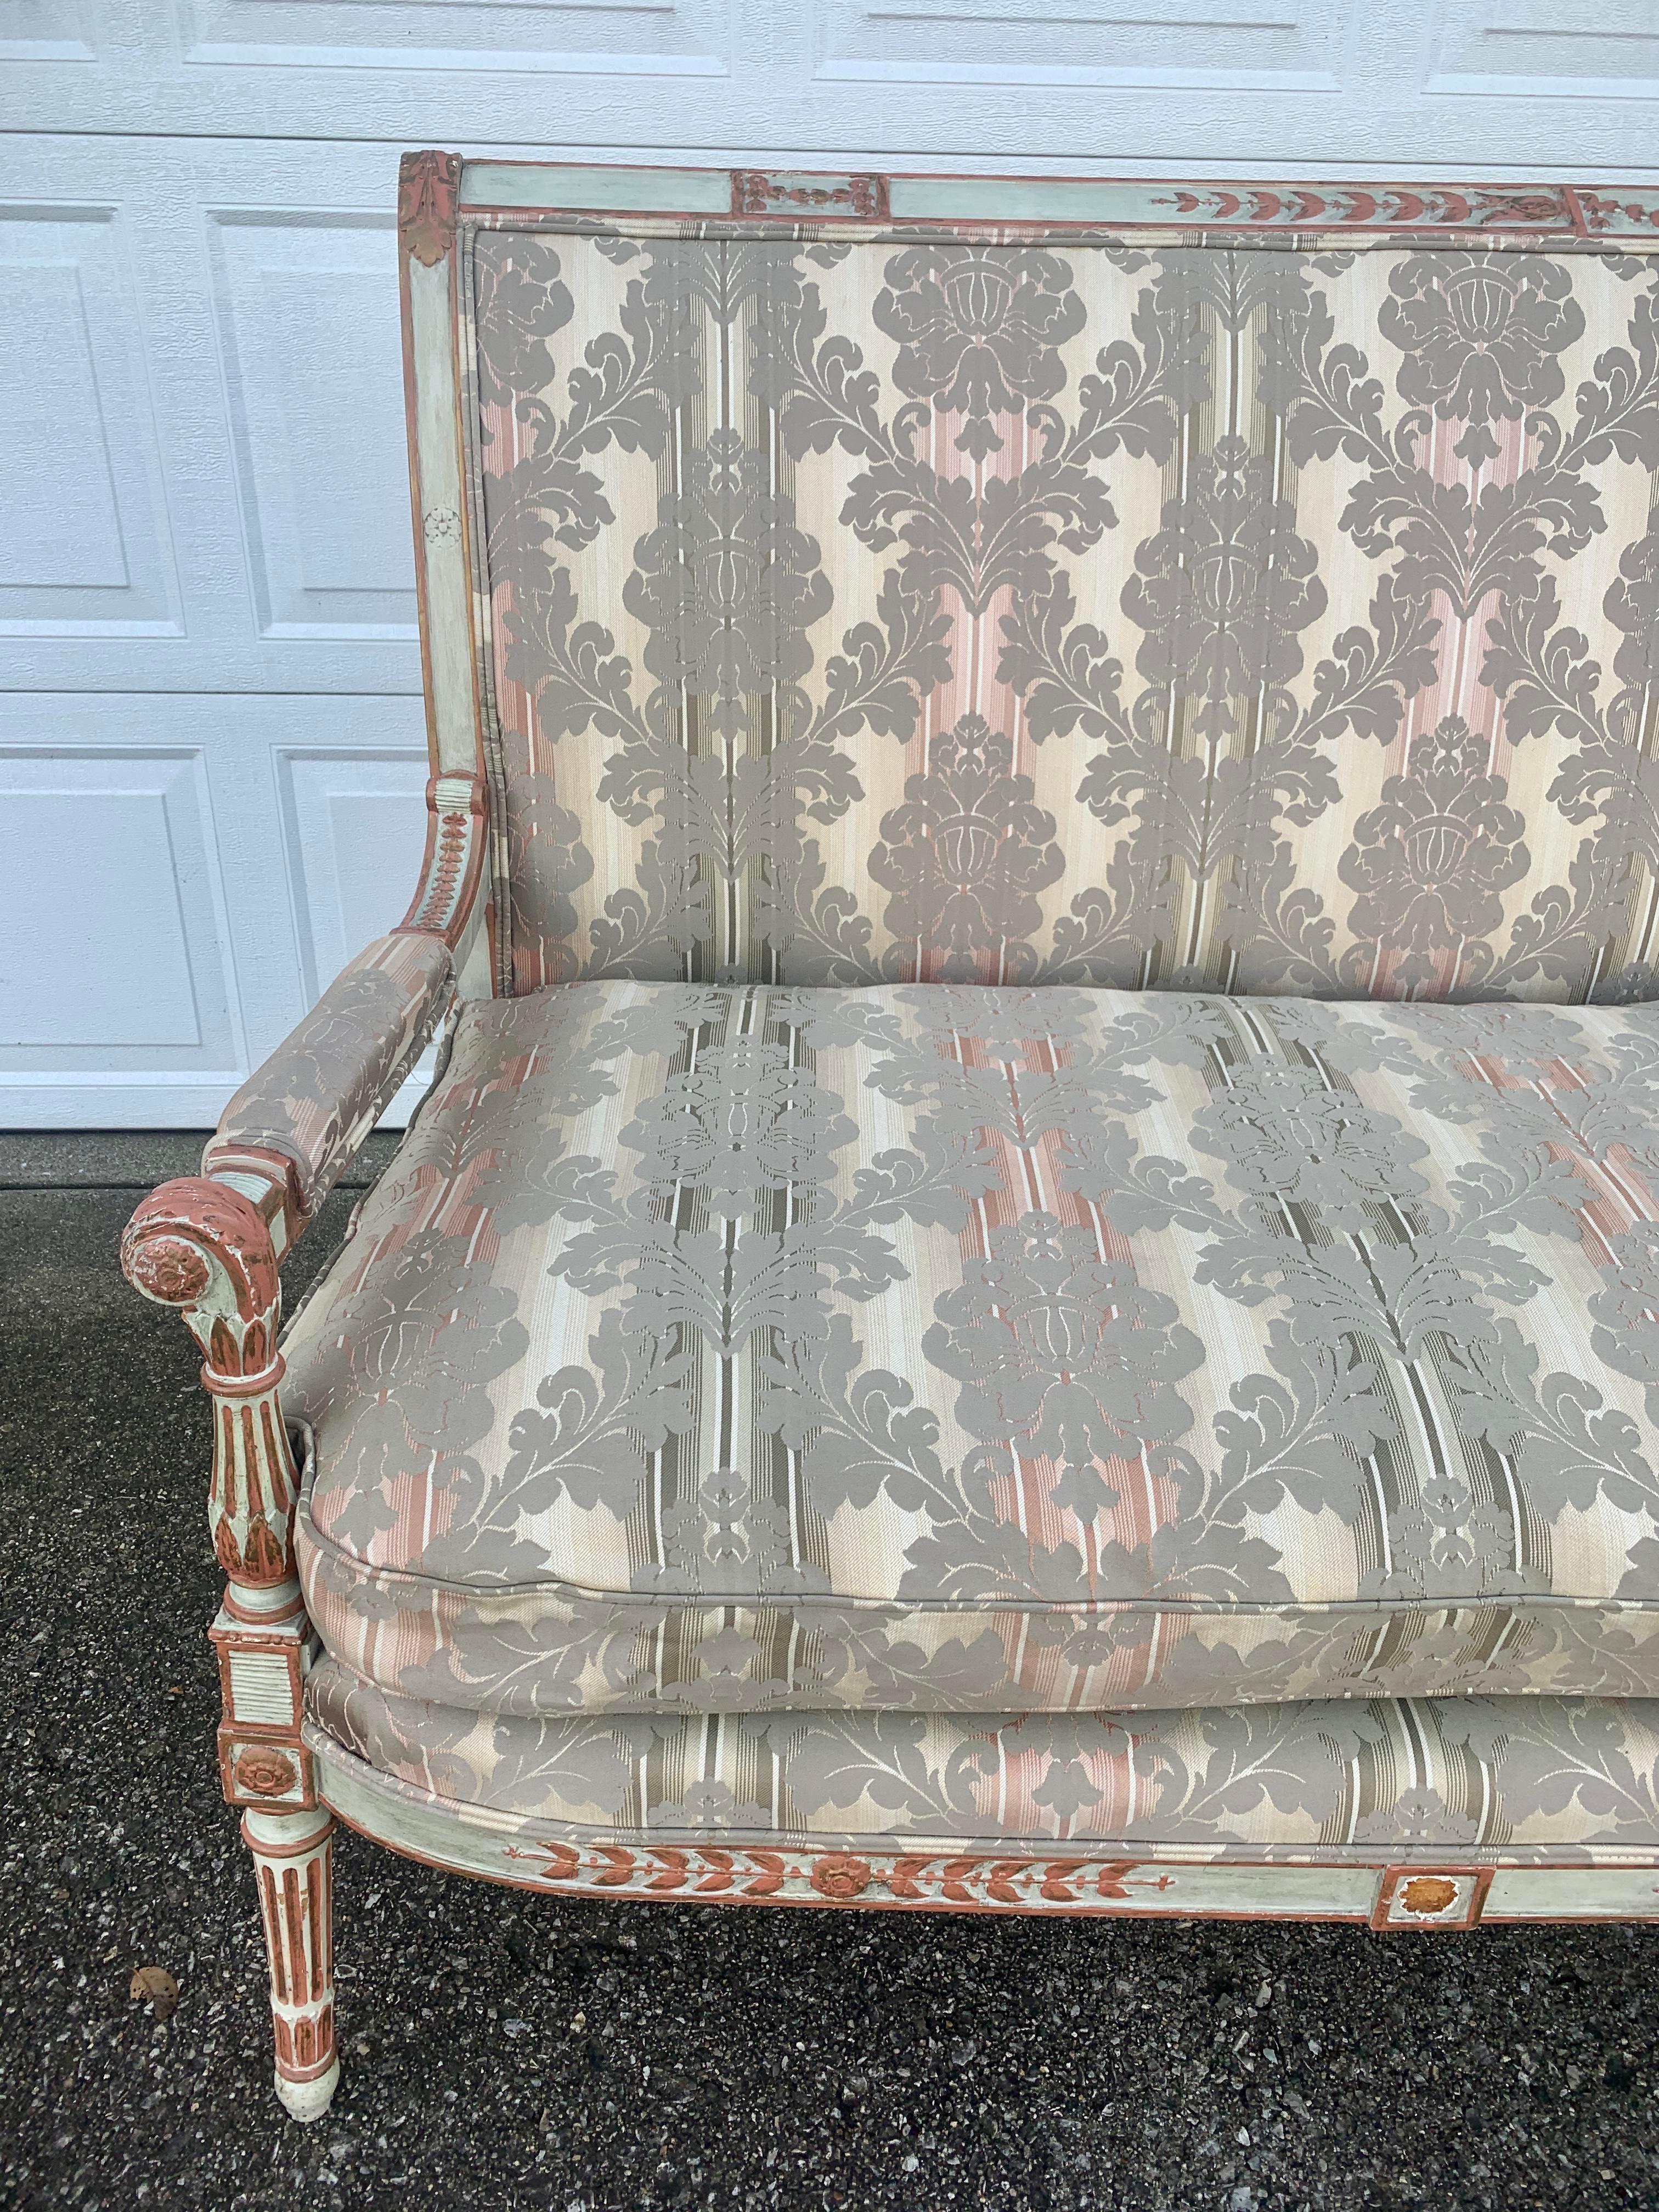 A gorgeous French provincial sofa

Circa early 20th century

Carved wood frame with original paint, damask upholstery, and removable down filled cushion

Measures: 70.25